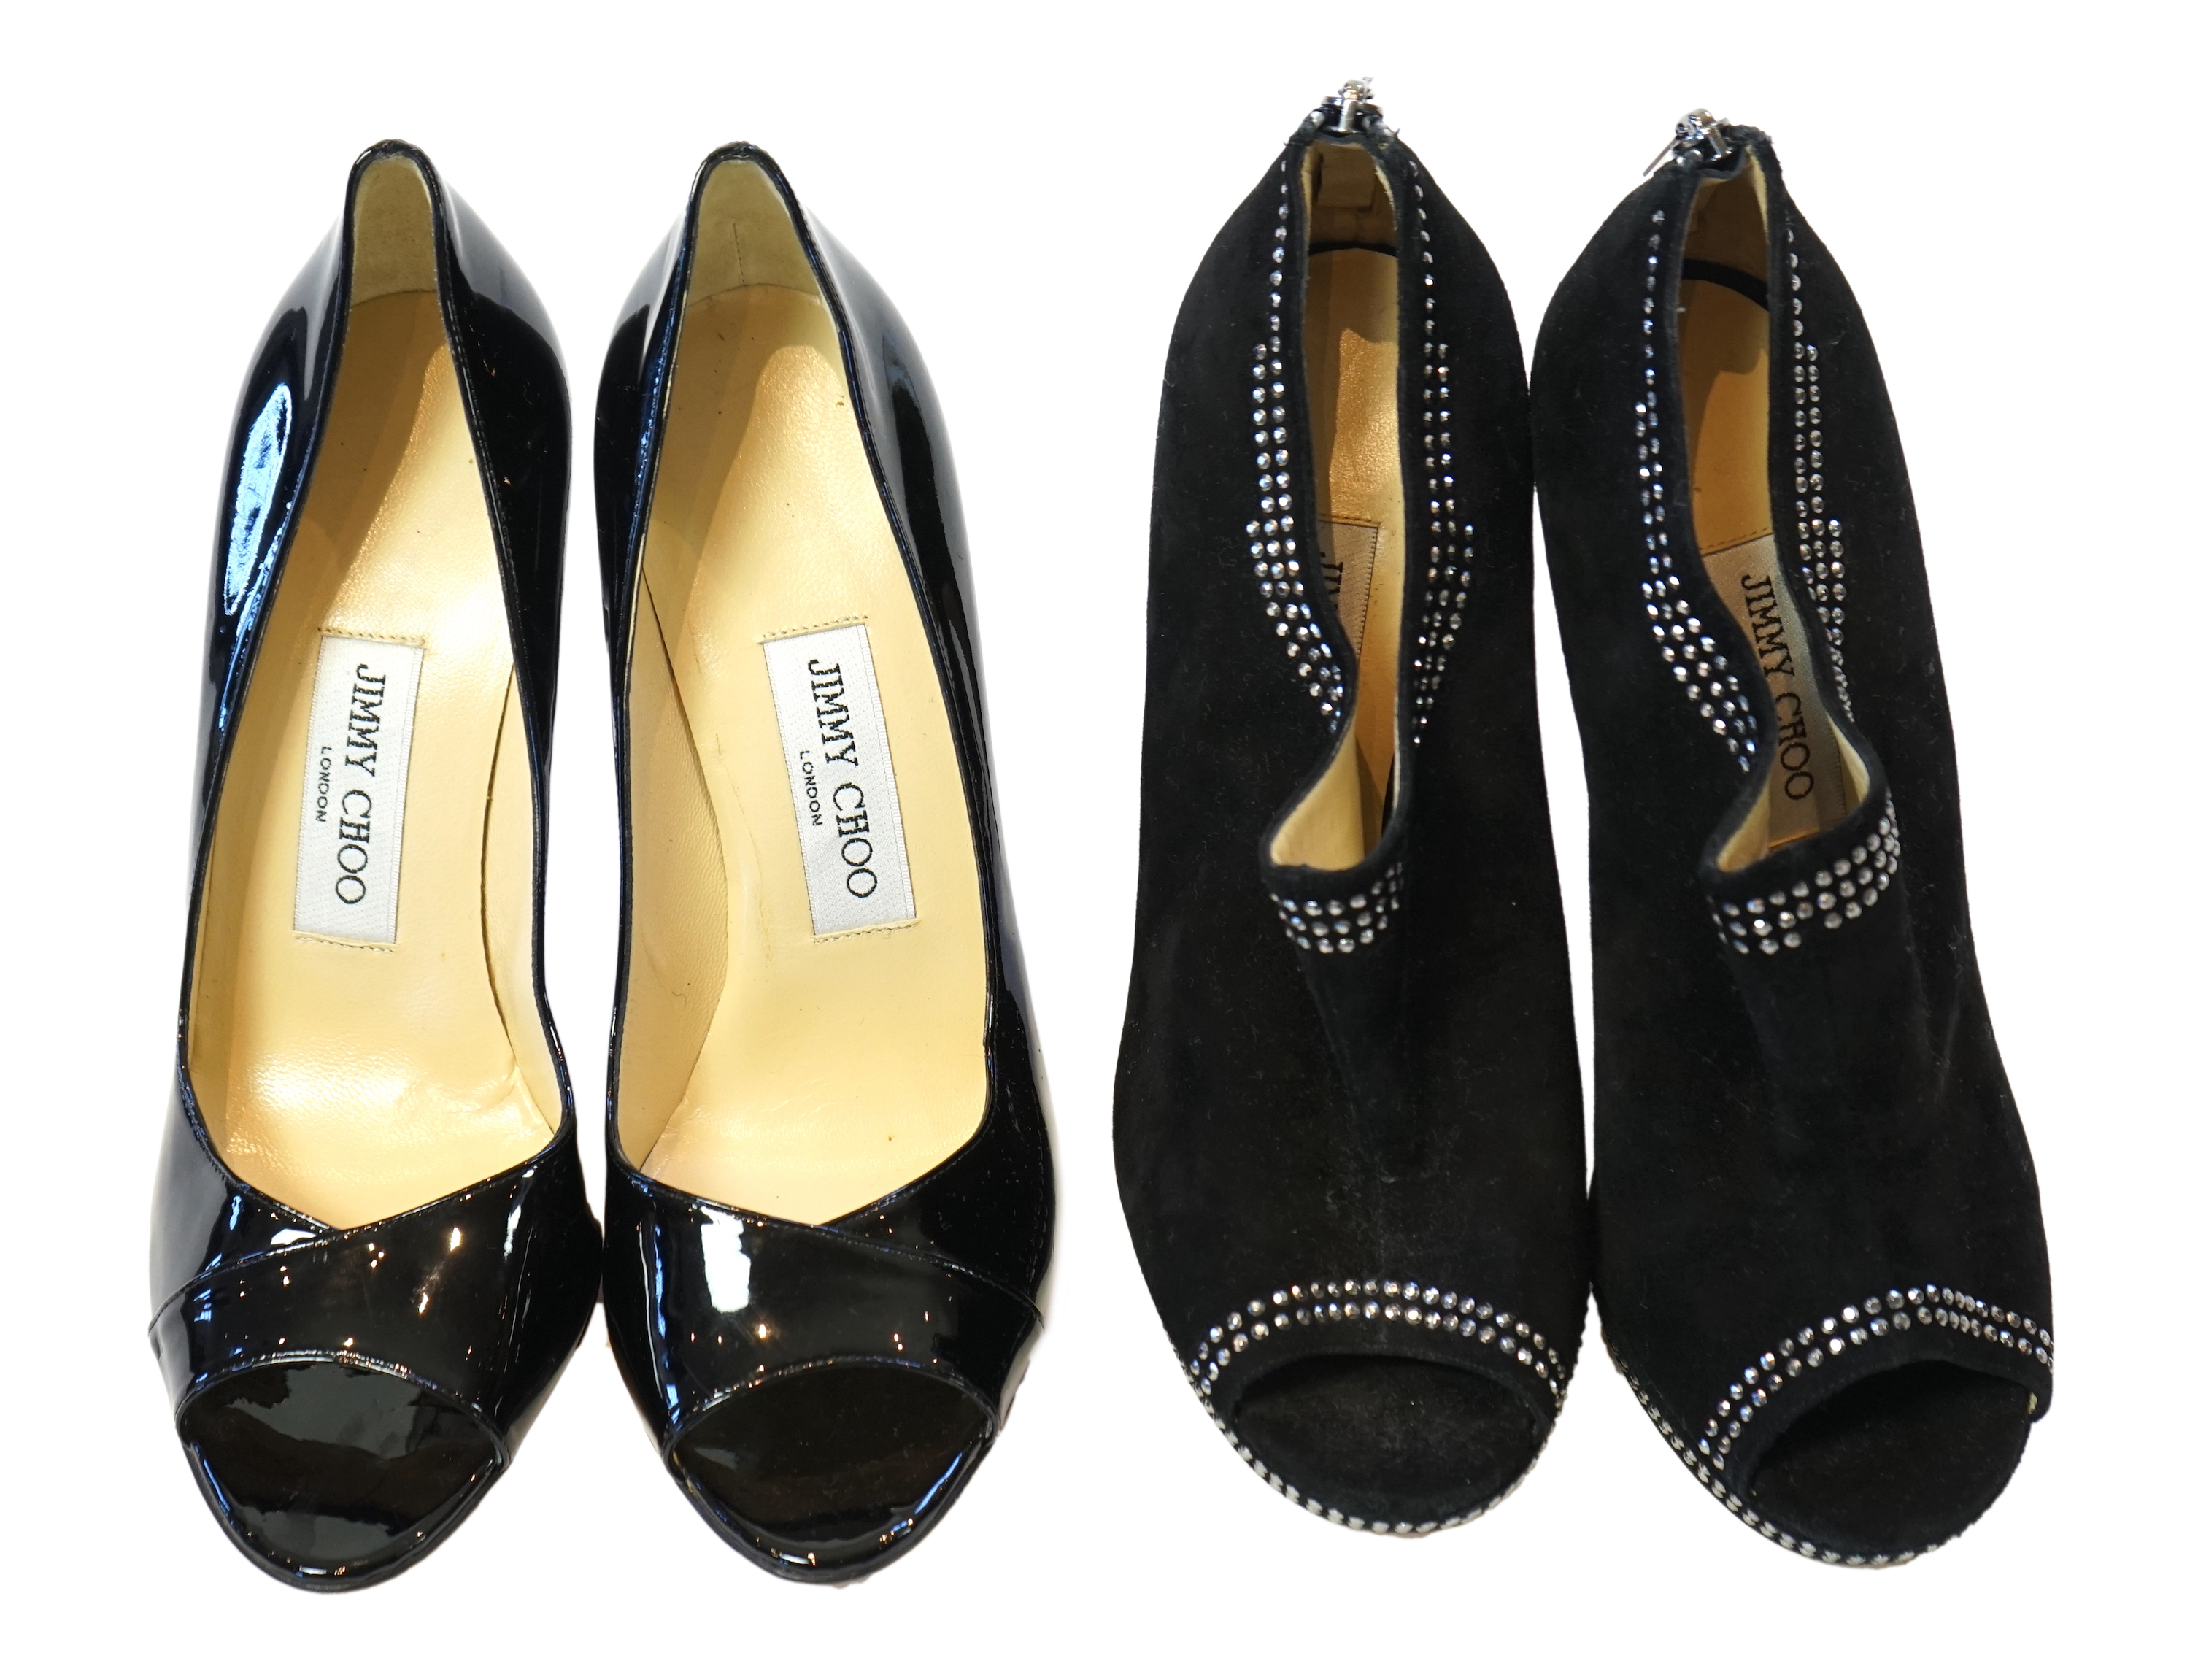 Two pairs of Jimmy Choo black lady's heeled open toe shoes, size EU 39